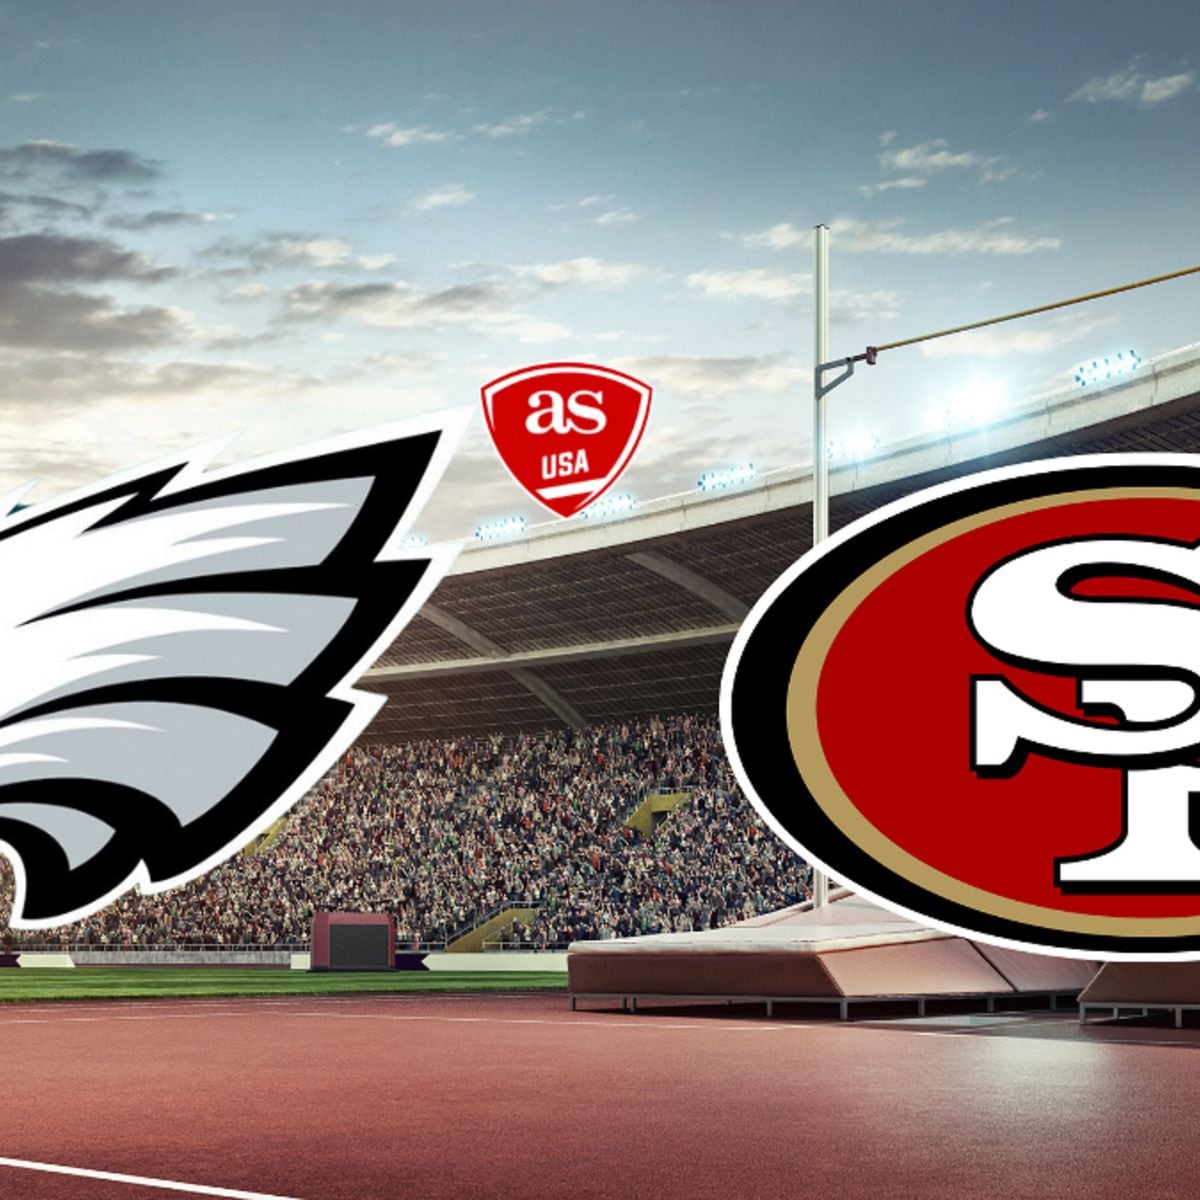 49ers vs Eagles NFC Championship: Times, how to watch on TV